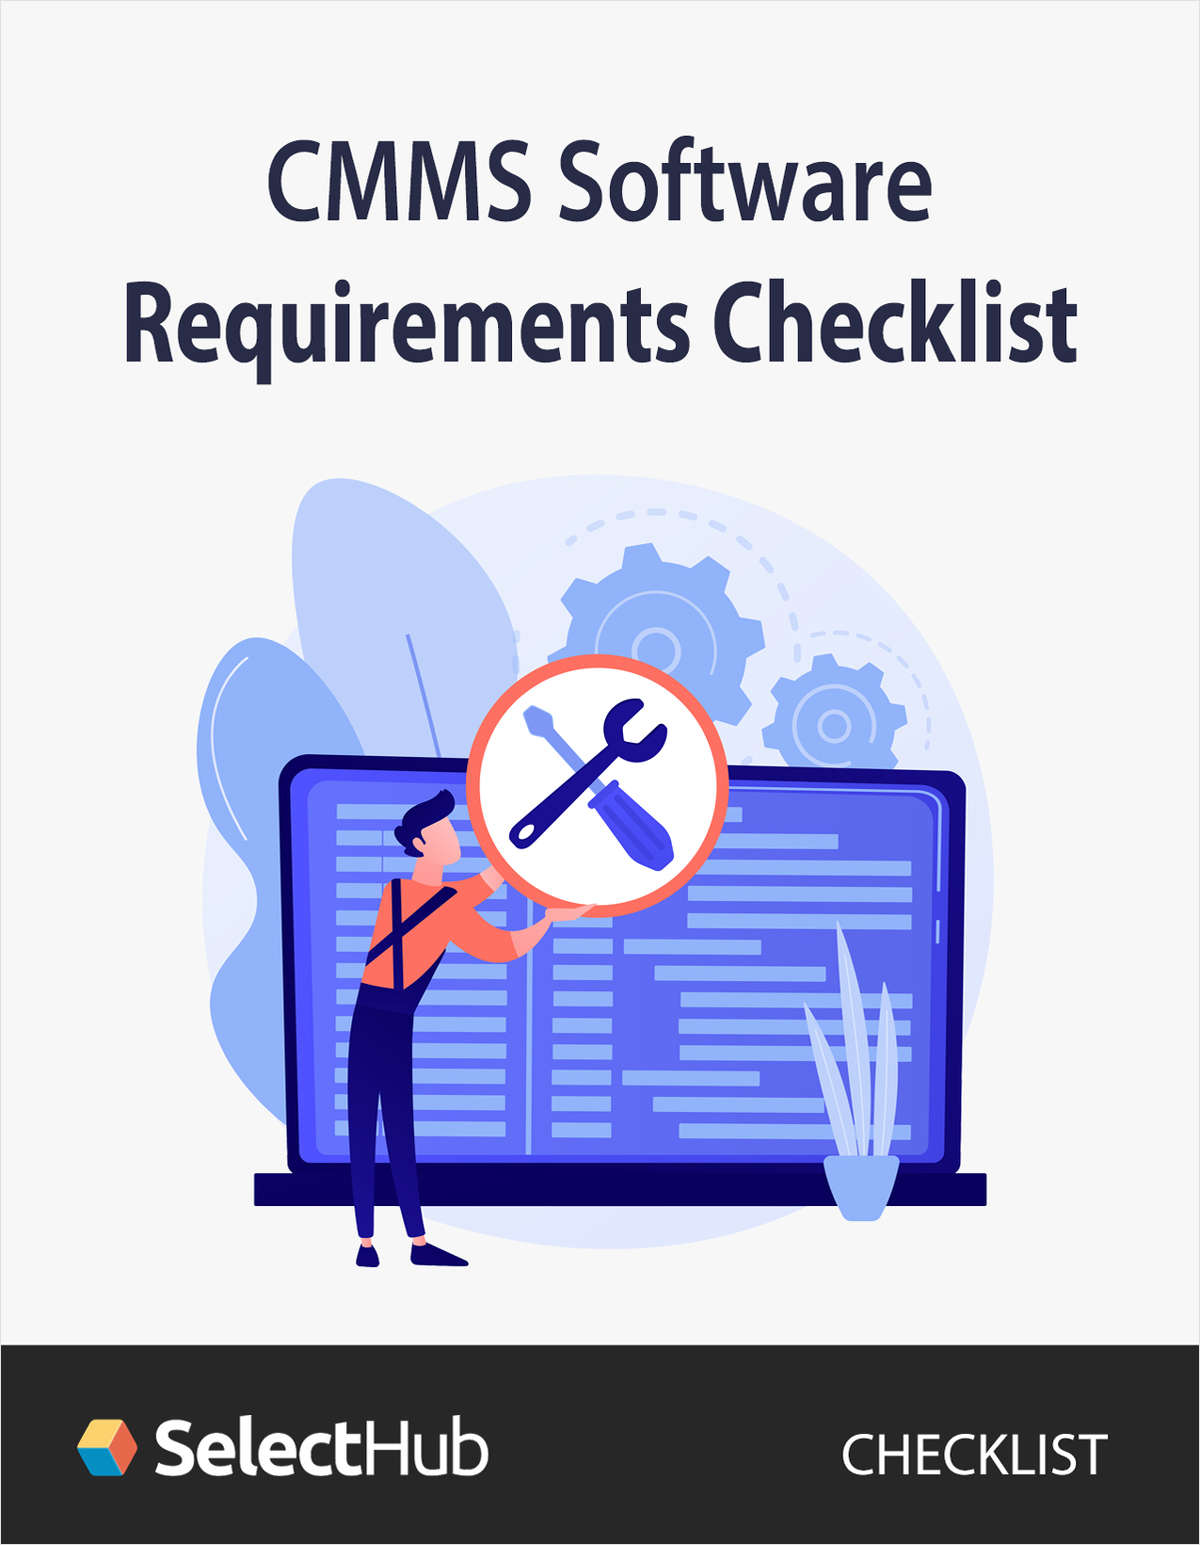 CMMS Maintenance Management Software Requirements Checklist for 2022